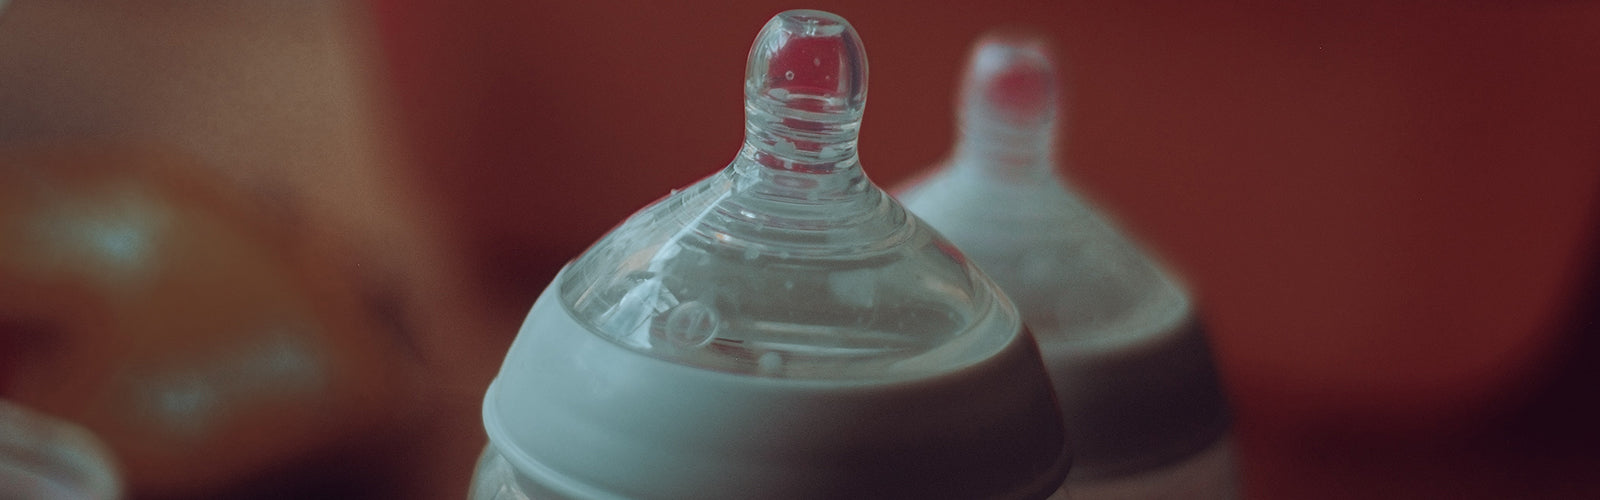 Two baby bottles